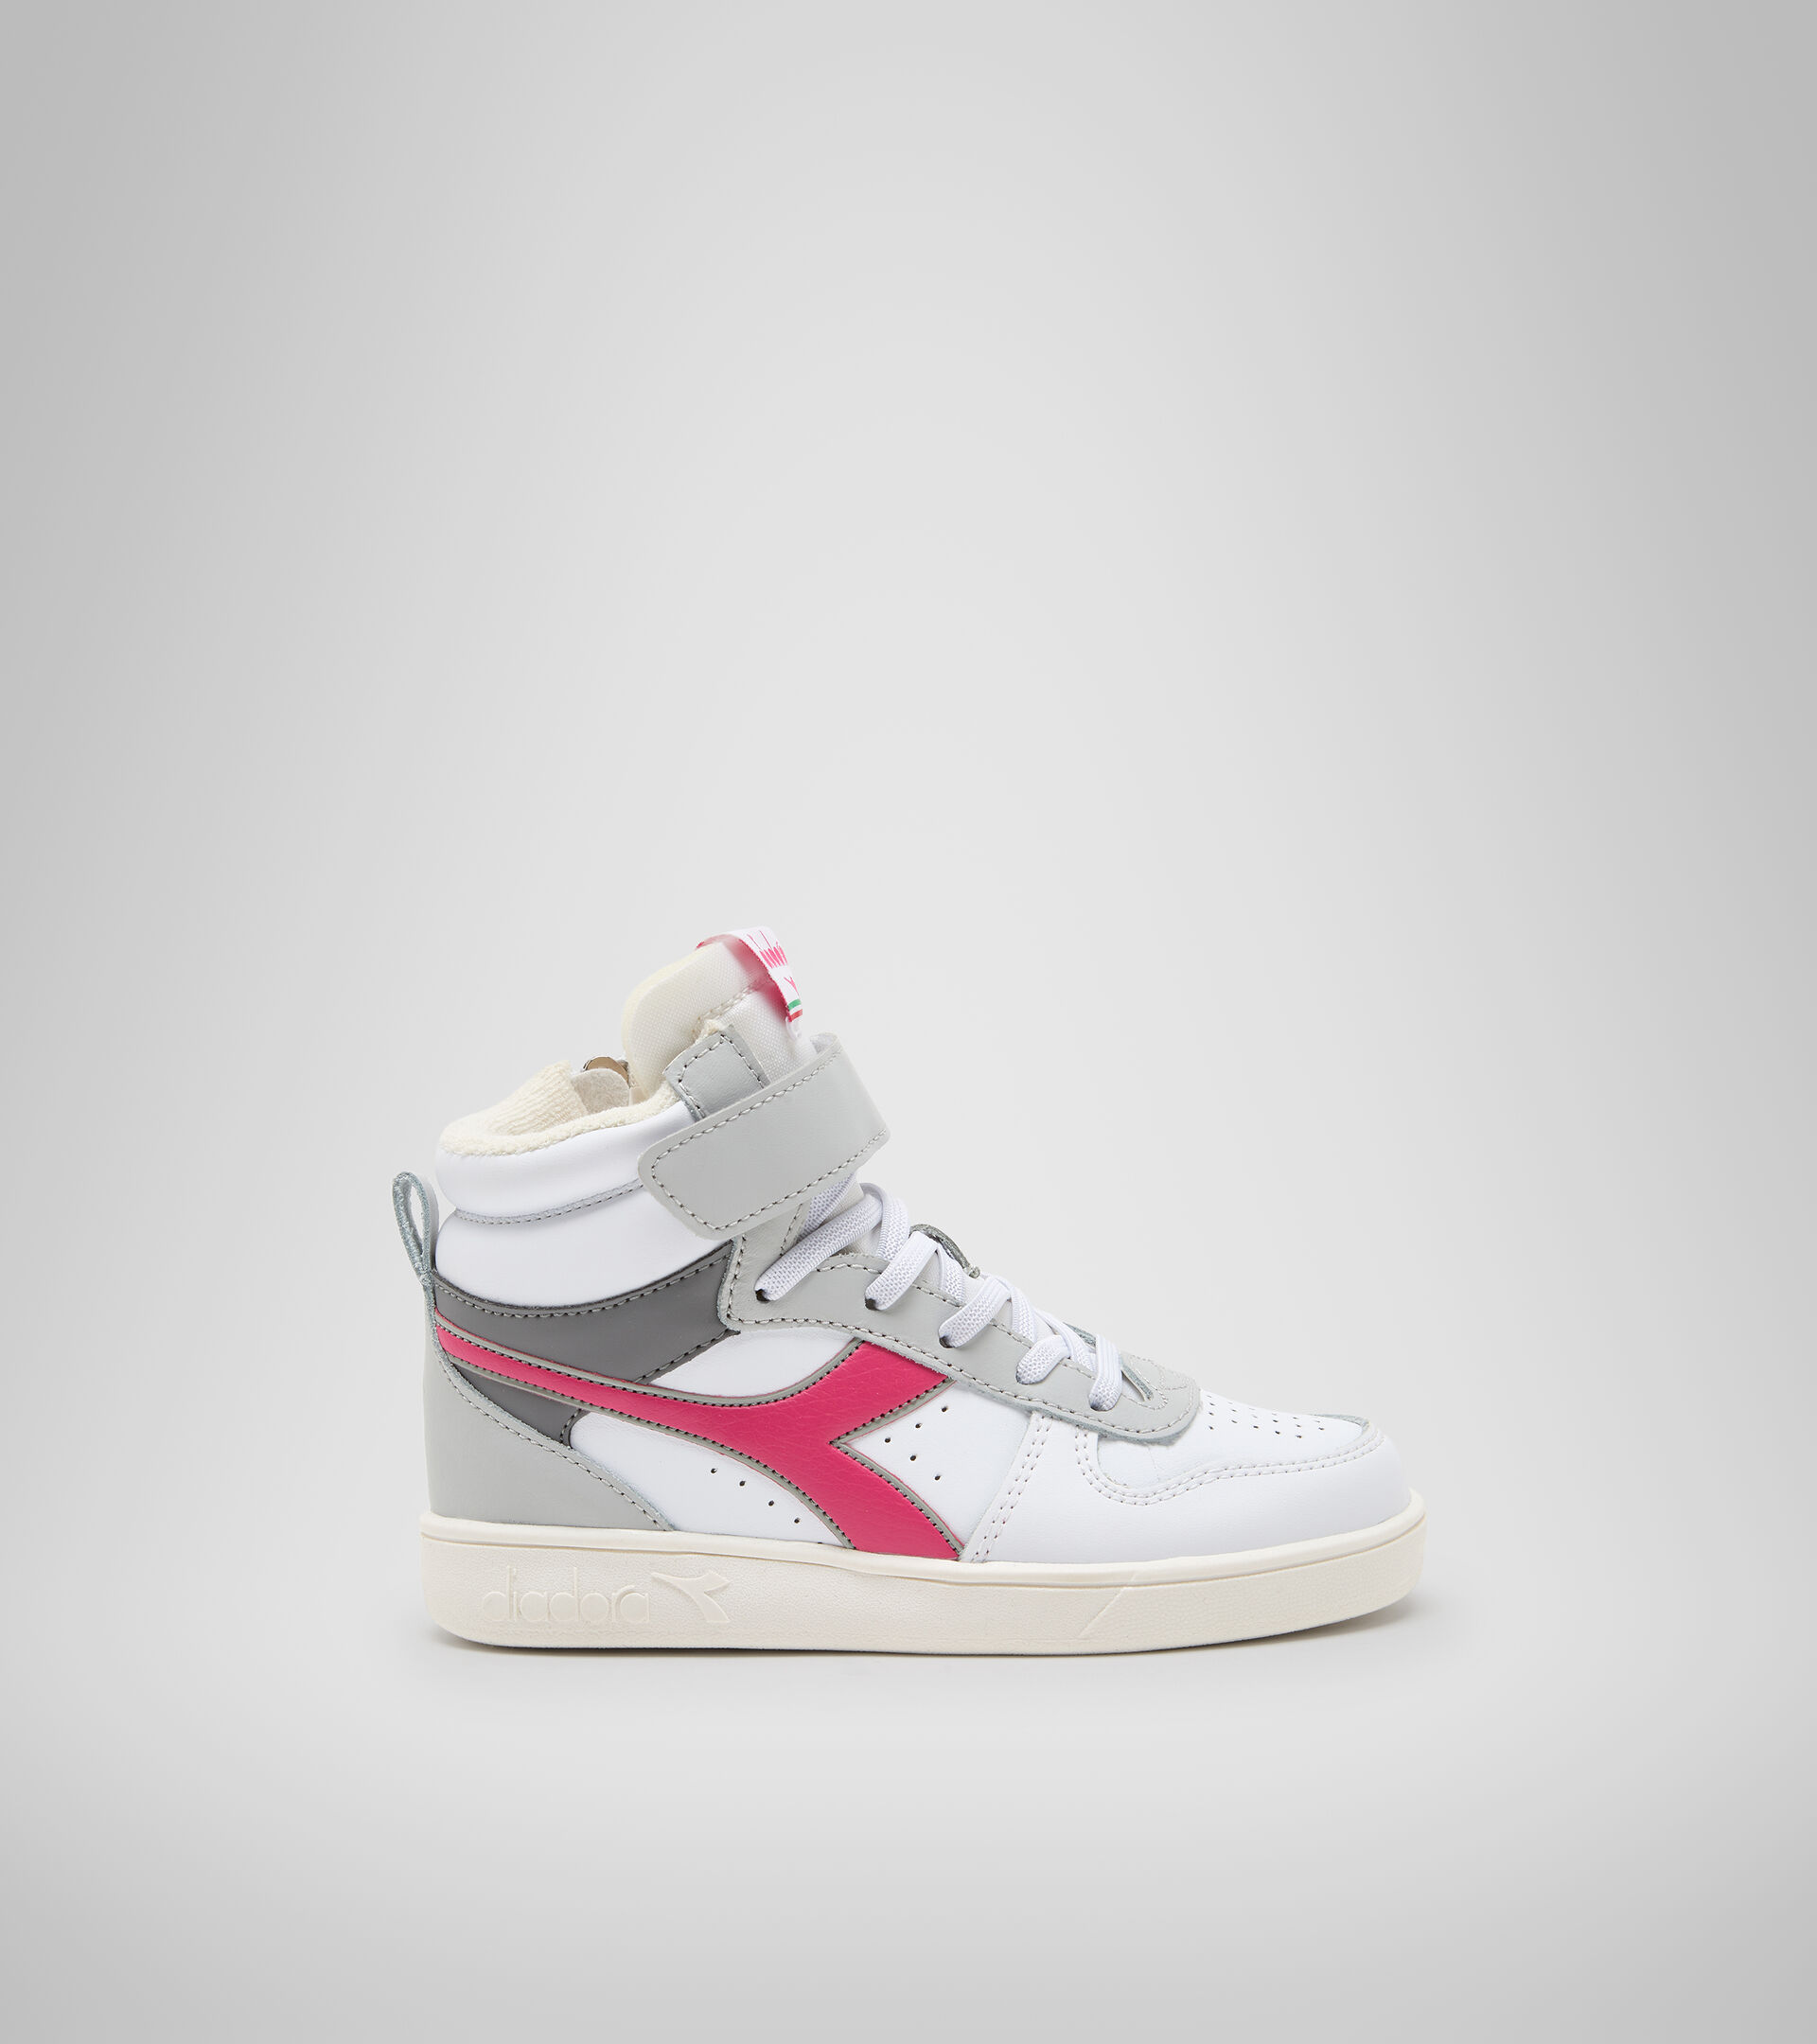 Sports shoes - Kids 4-8 years MAGIC BASKET MID PS WHT/FROST GRY/RASPBERRY SORBET - Diadora